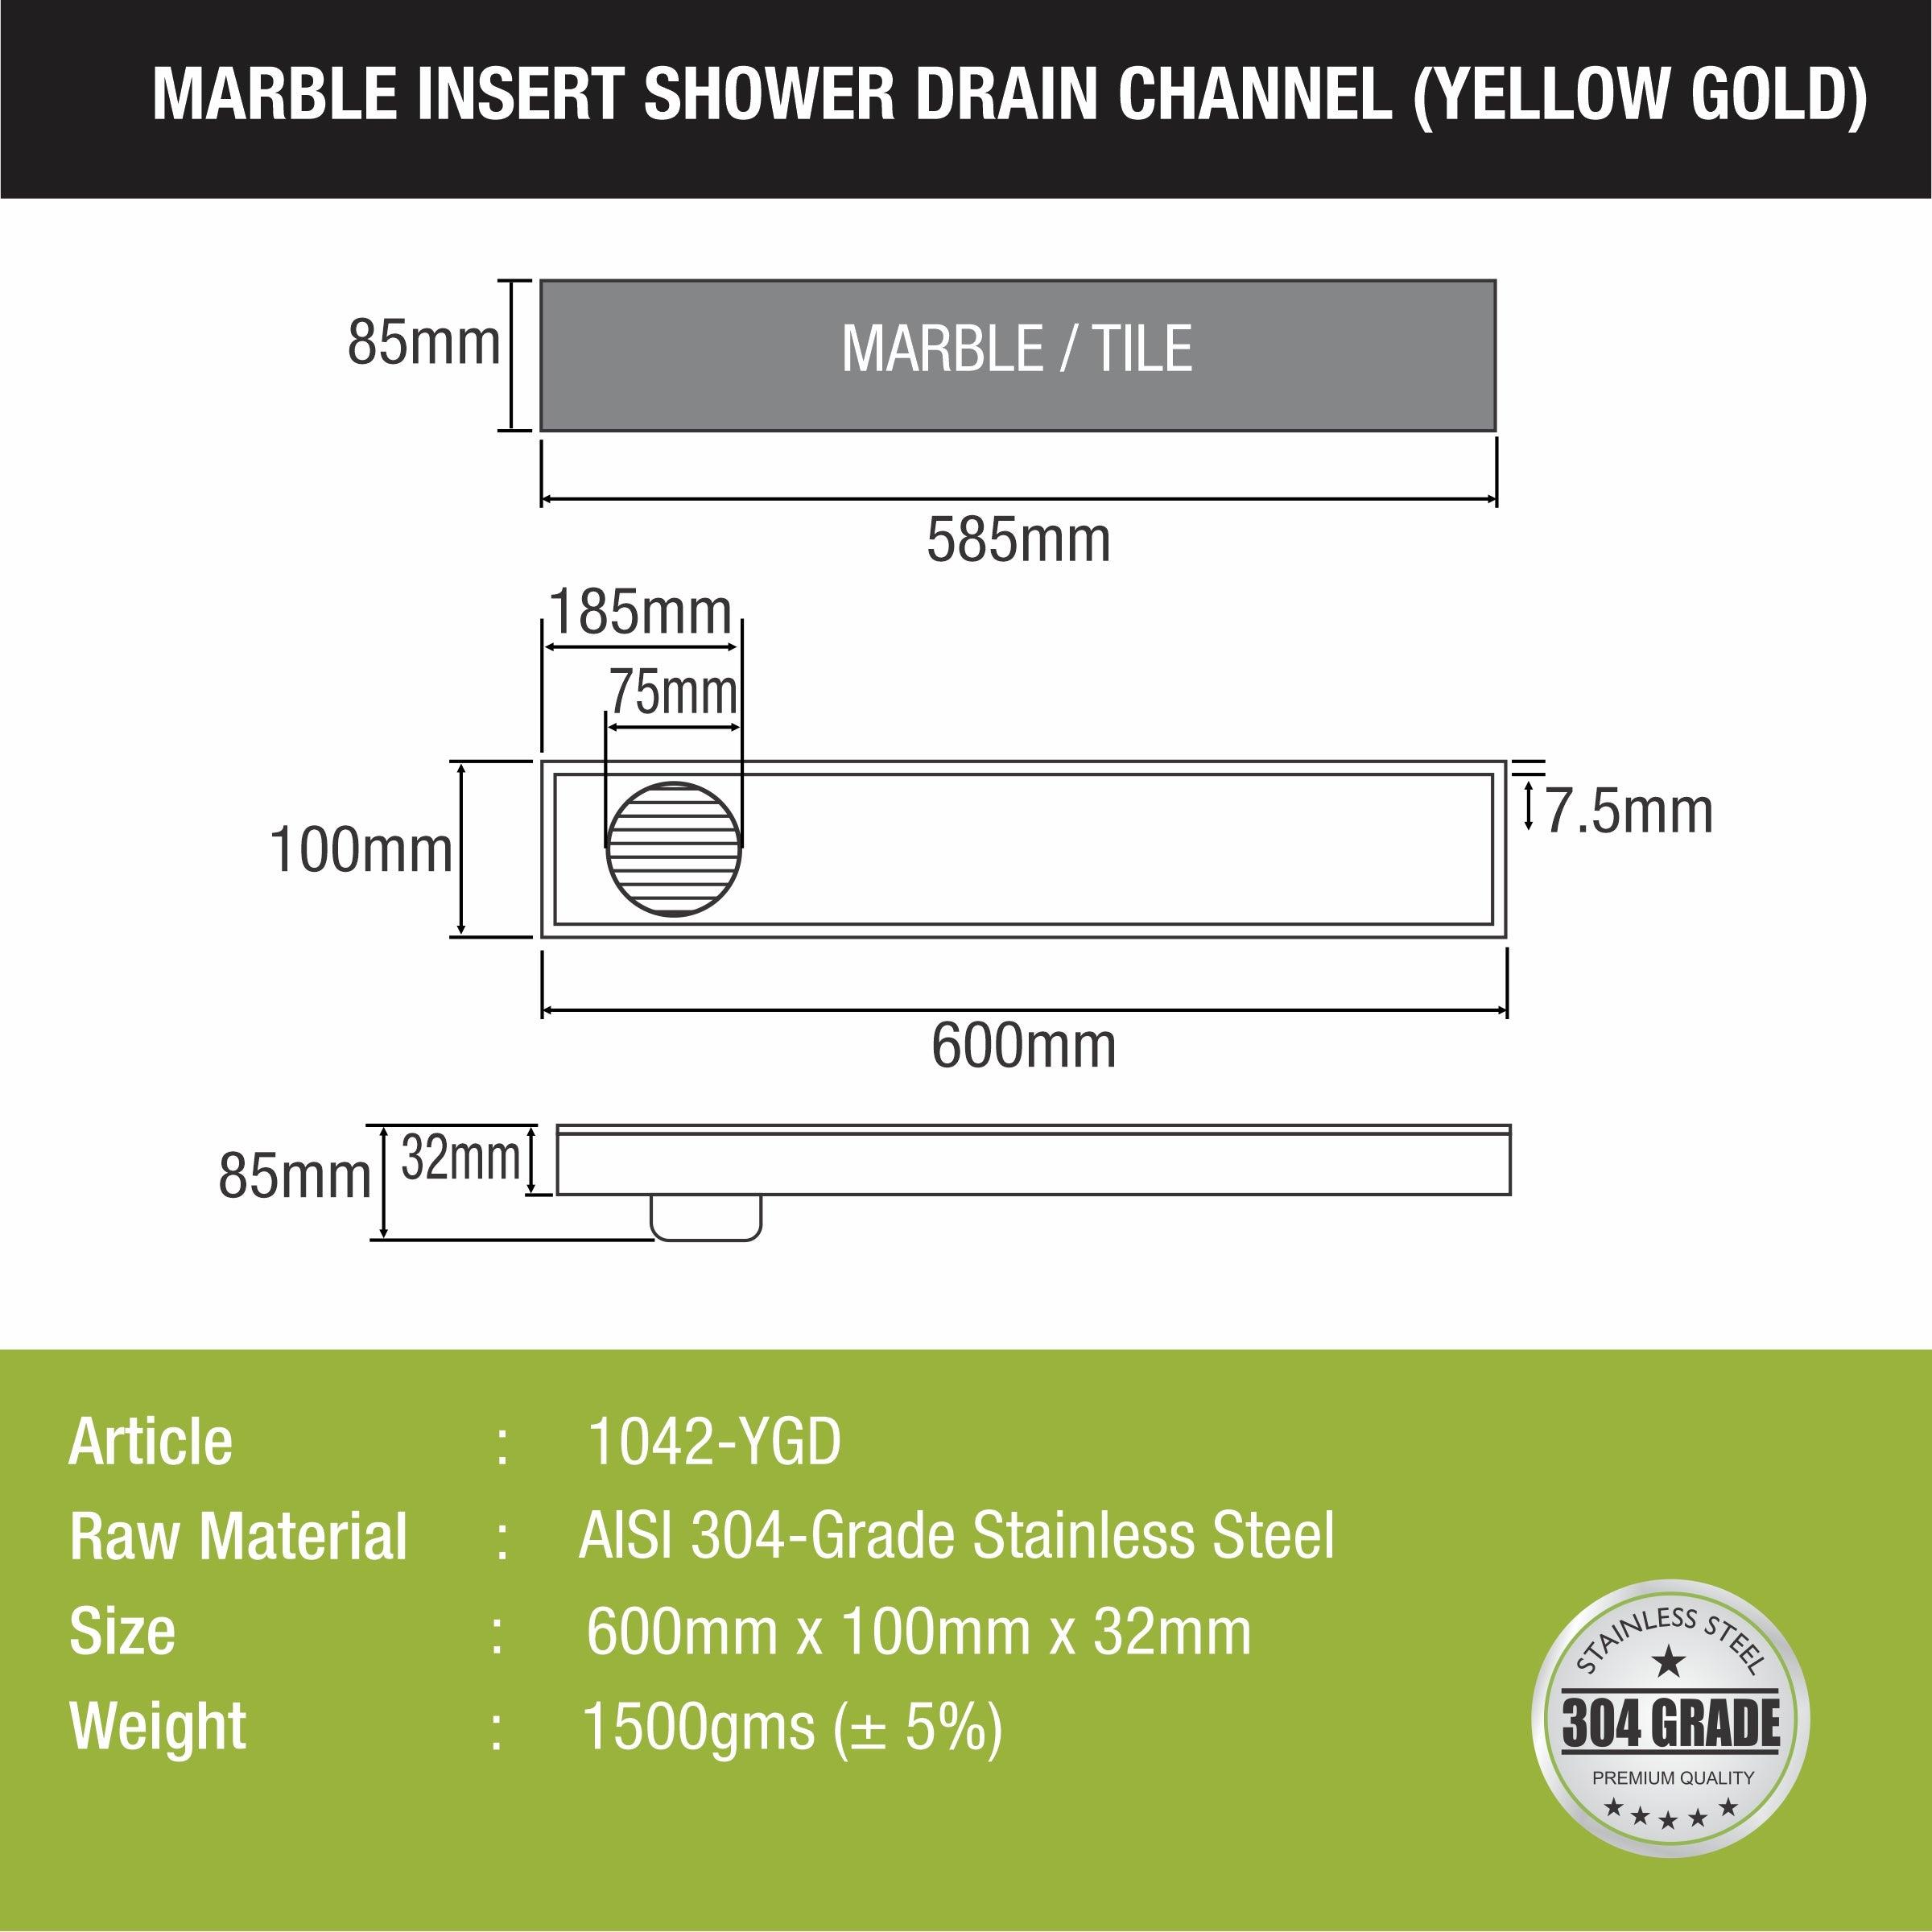 Marble Insert Shower Drain Channel - Yellow Gold (24 x 4 Inches) sizes and dimensions